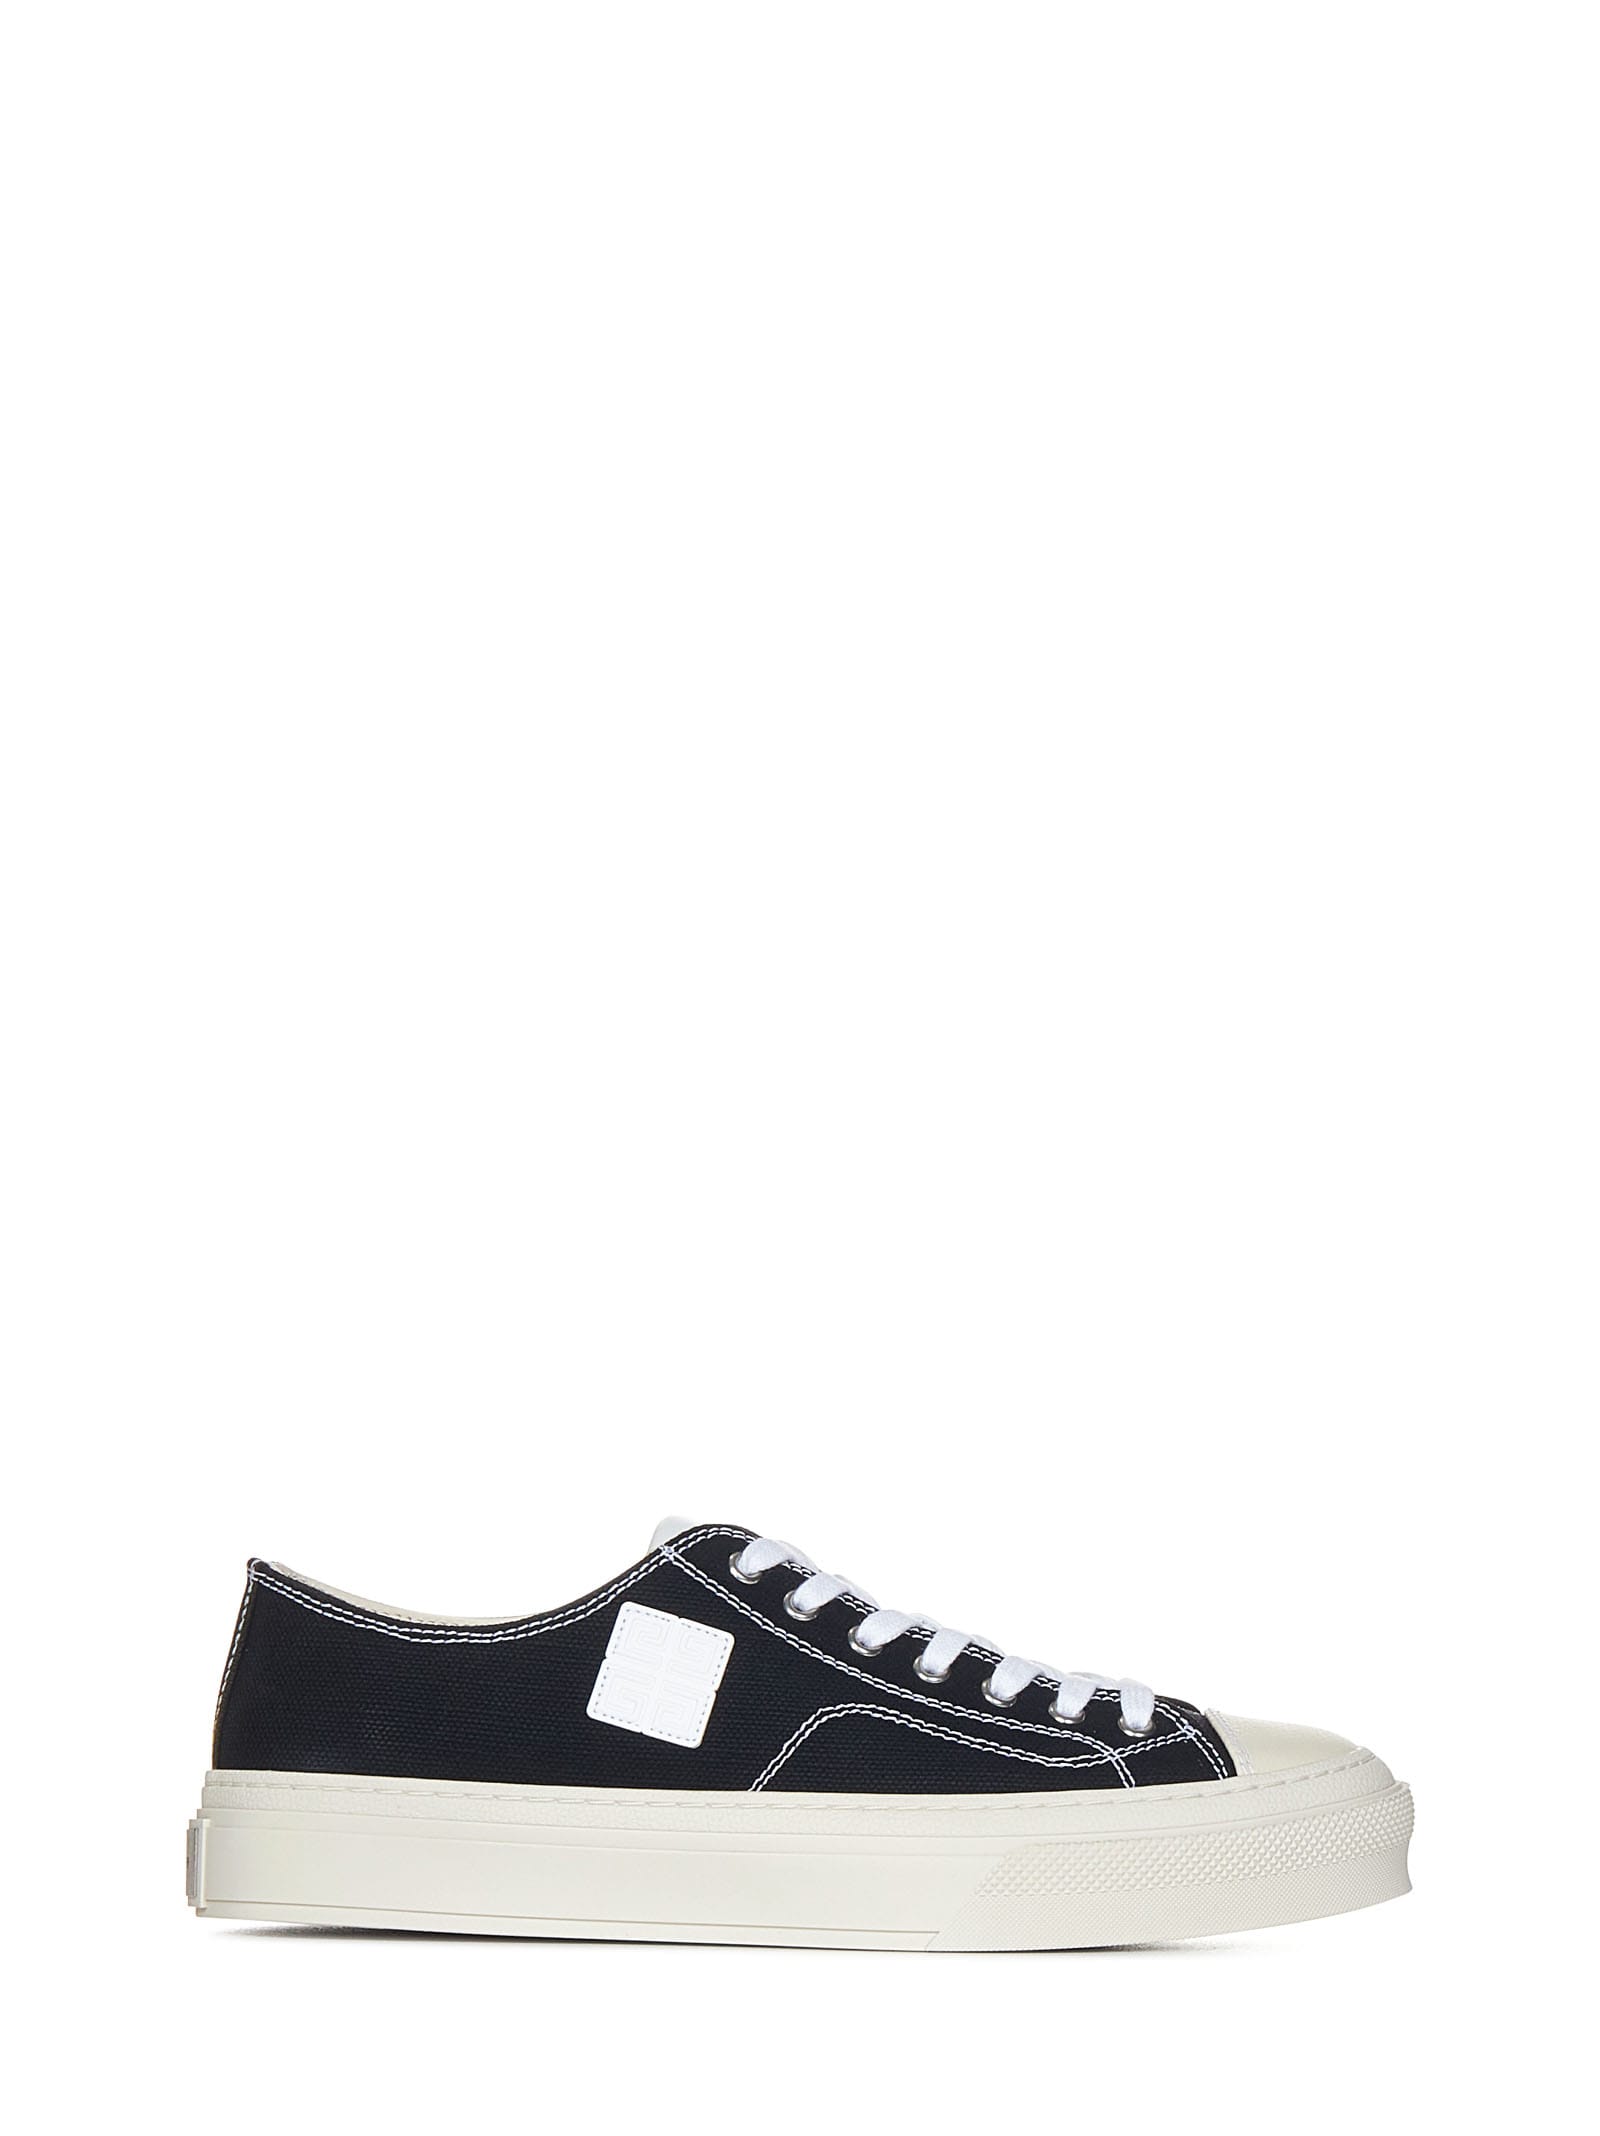 Givenchy City Sneakers In Black